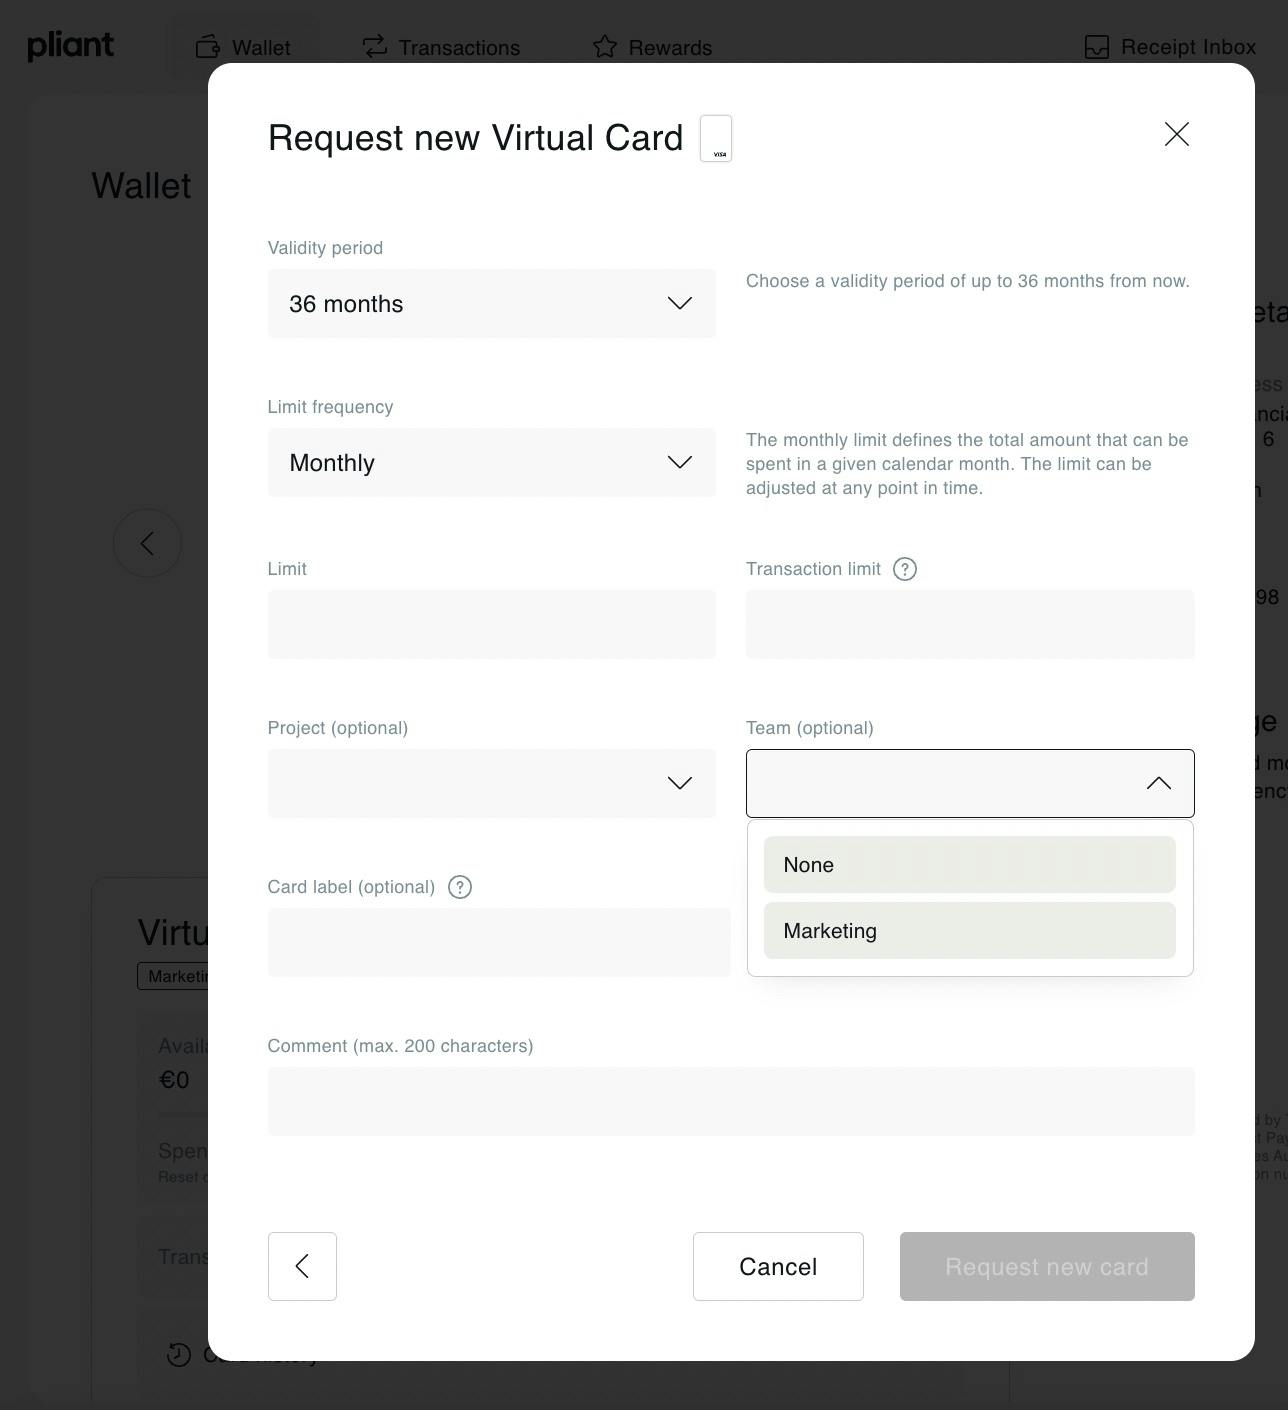 How to request a new virtual card in Pliant